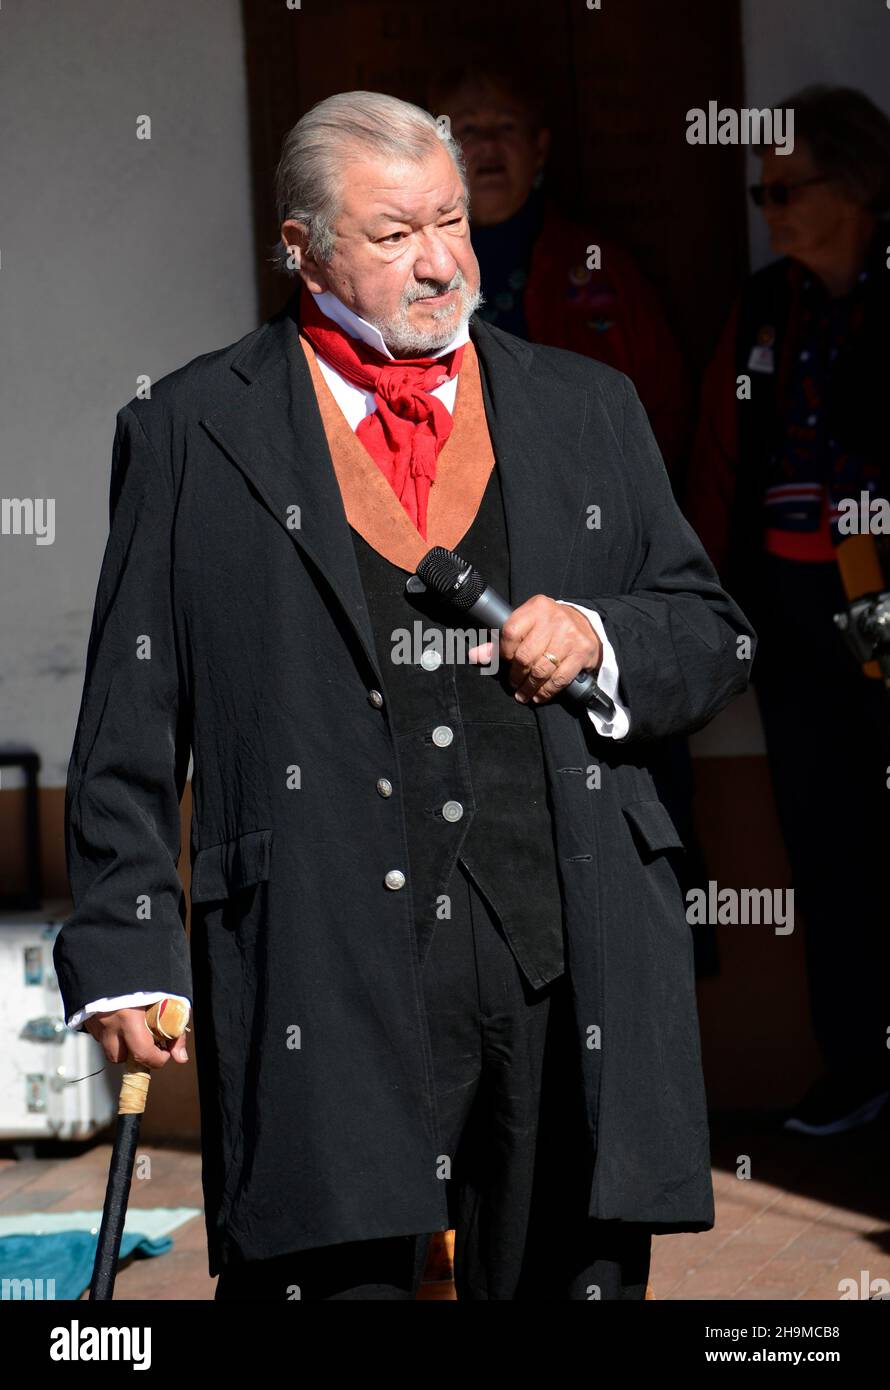 A reenactor portrays Mexican Governor Facundo Melgares at a reenactment of the 1821 opening of the Santa Fe Trail in Santa Fe, New Mexico. Stock Photo